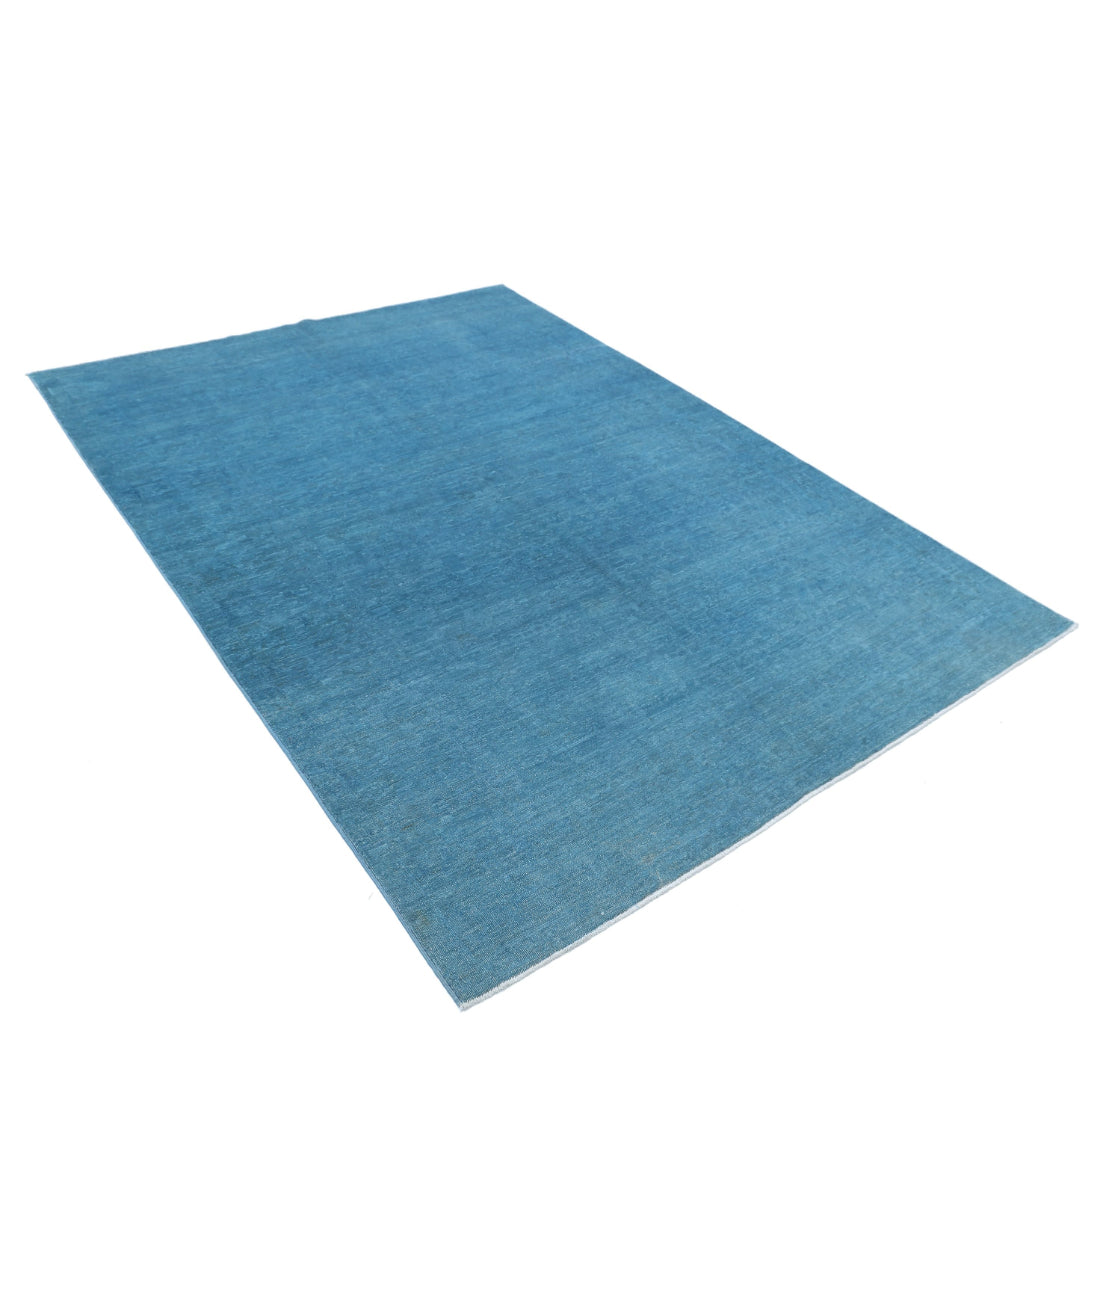 Hand Knotted Overdye Wool Rug - 5'11'' x 8'3'' 5'11'' x 8'3'' (178 X 248) / Blue / N/A